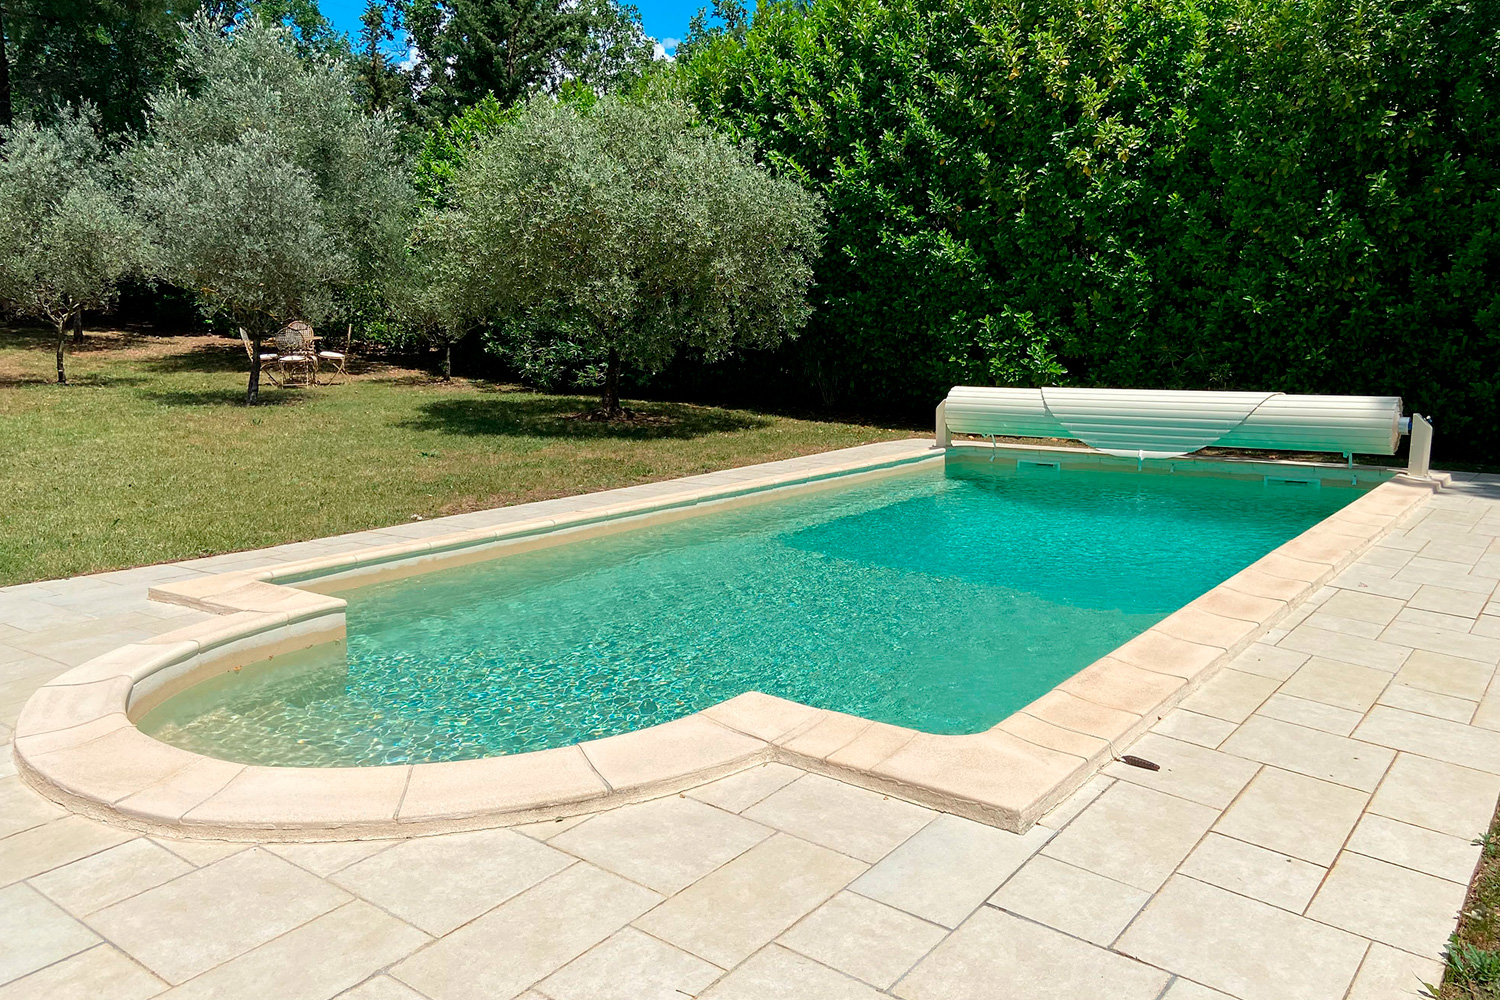 Garden with swimming pool - Vagnas